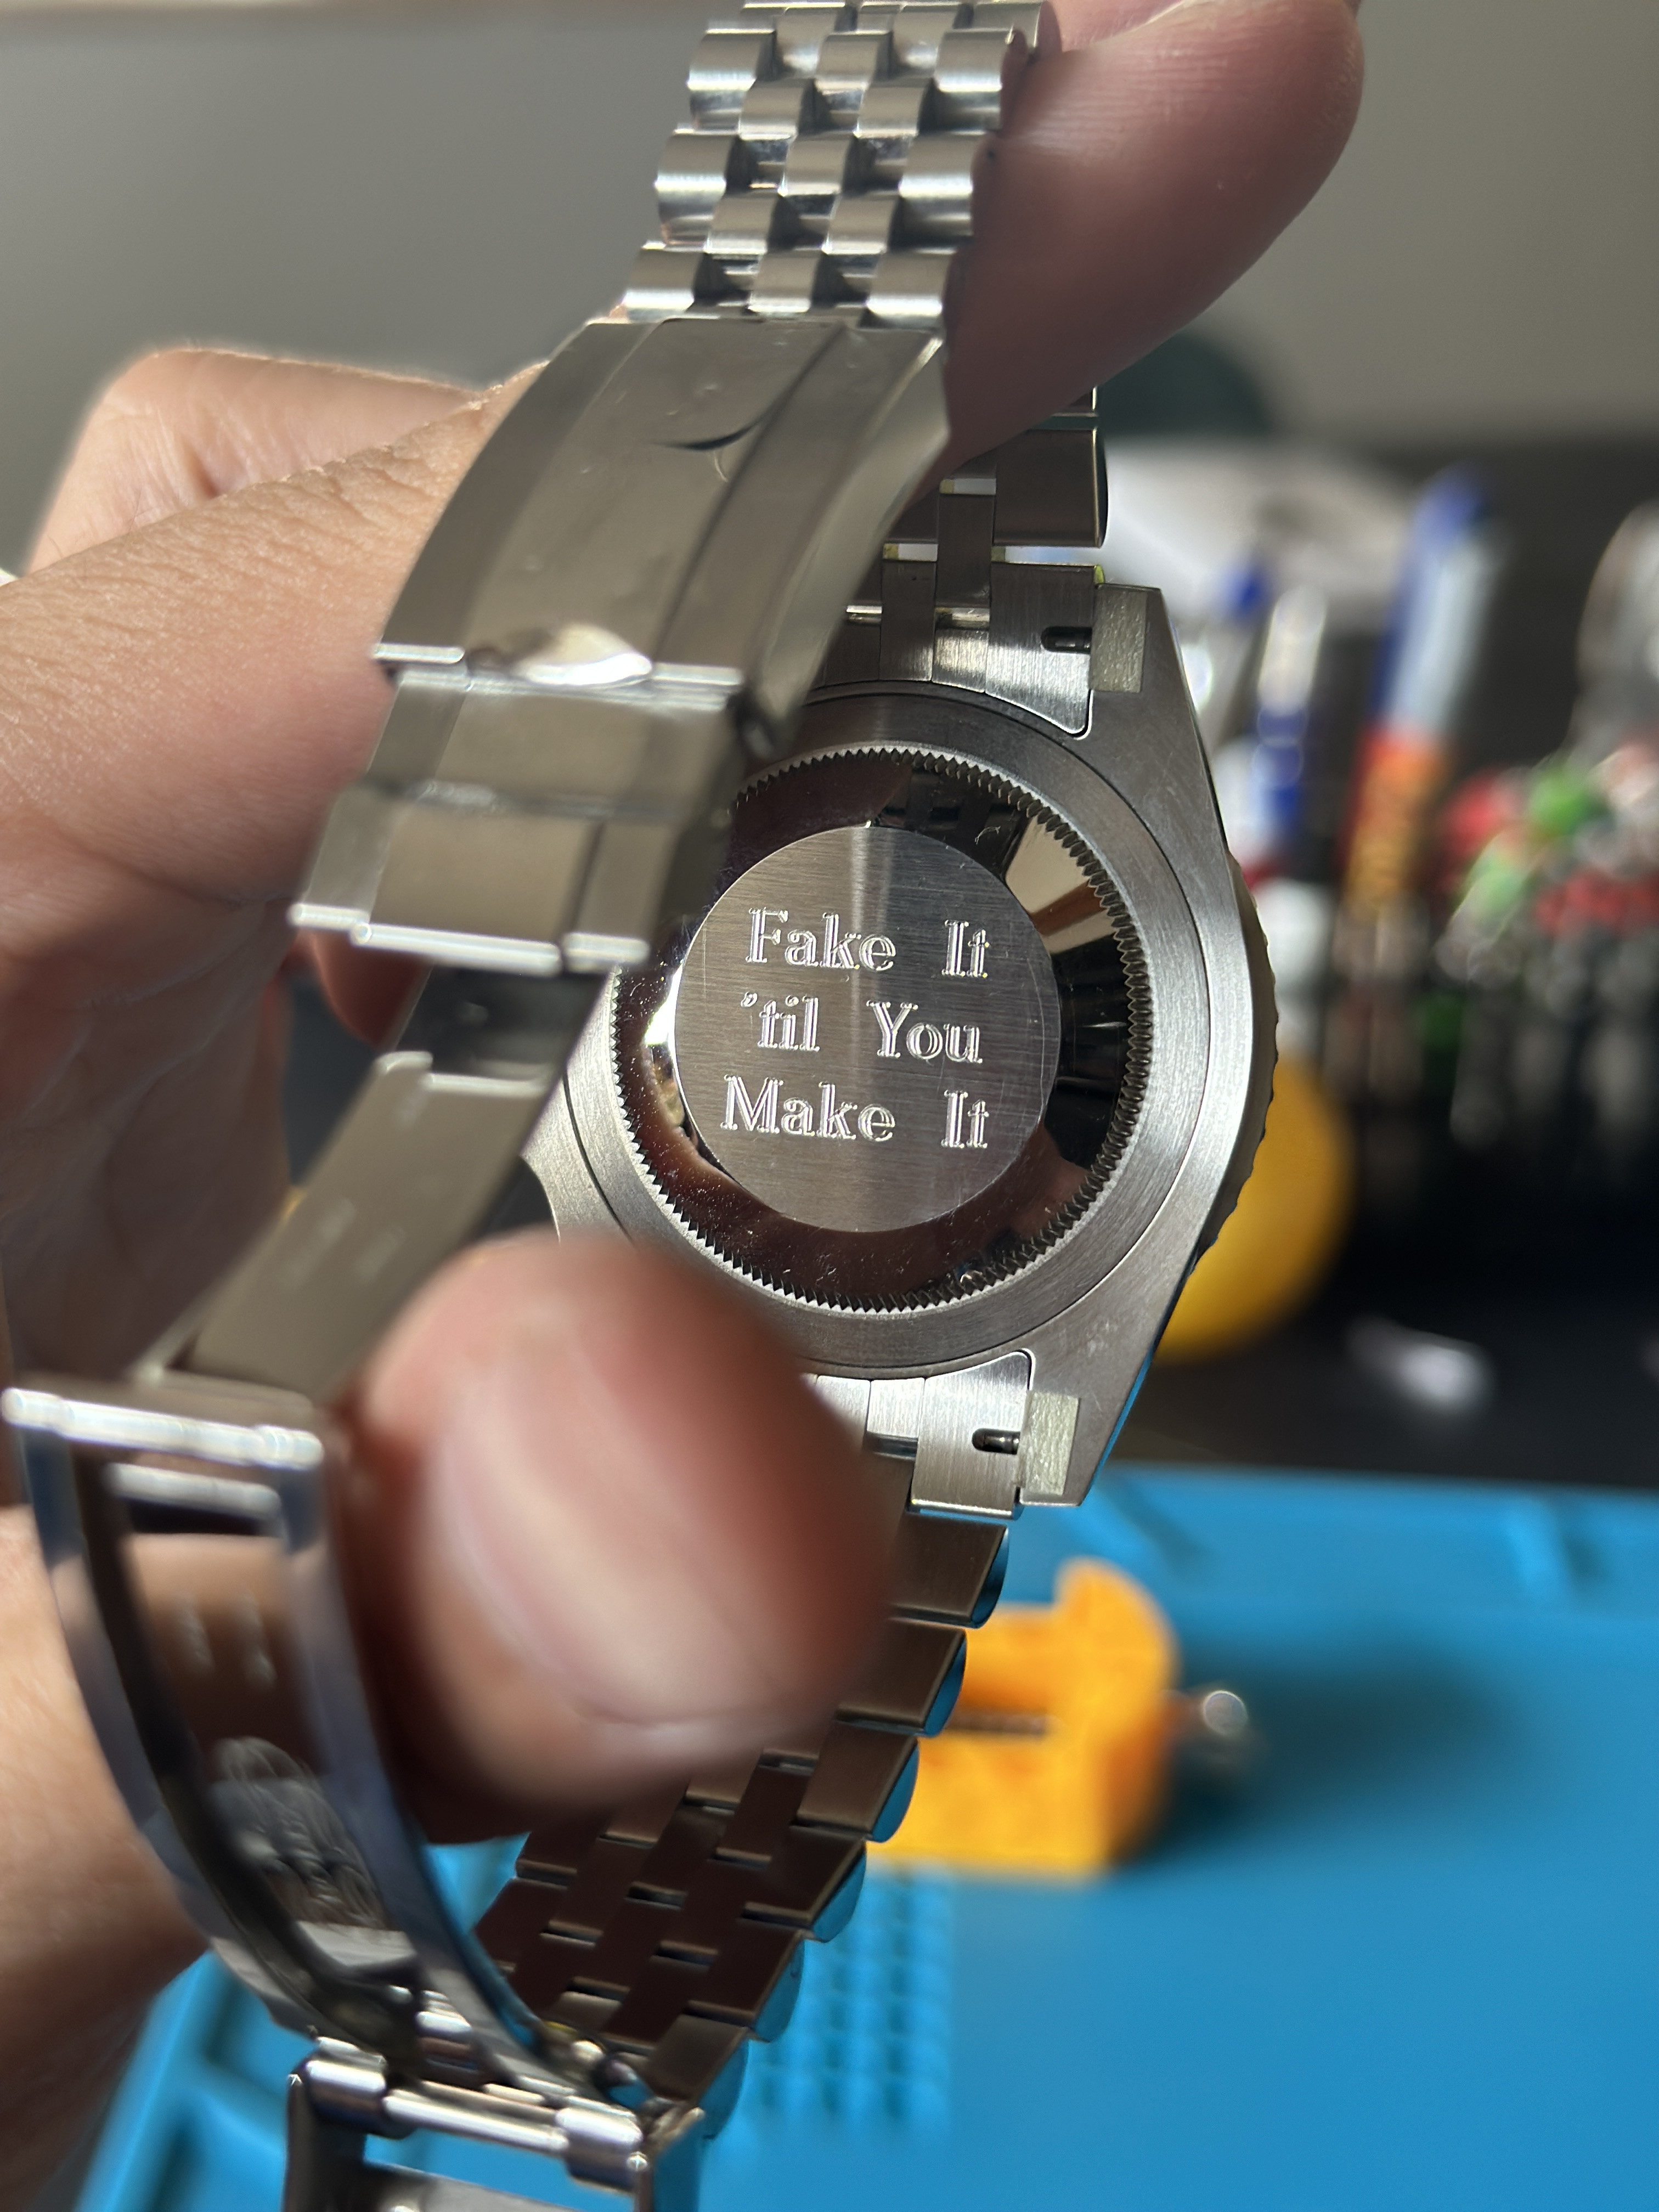 Any legit places in pune to restore old watches : r/pune